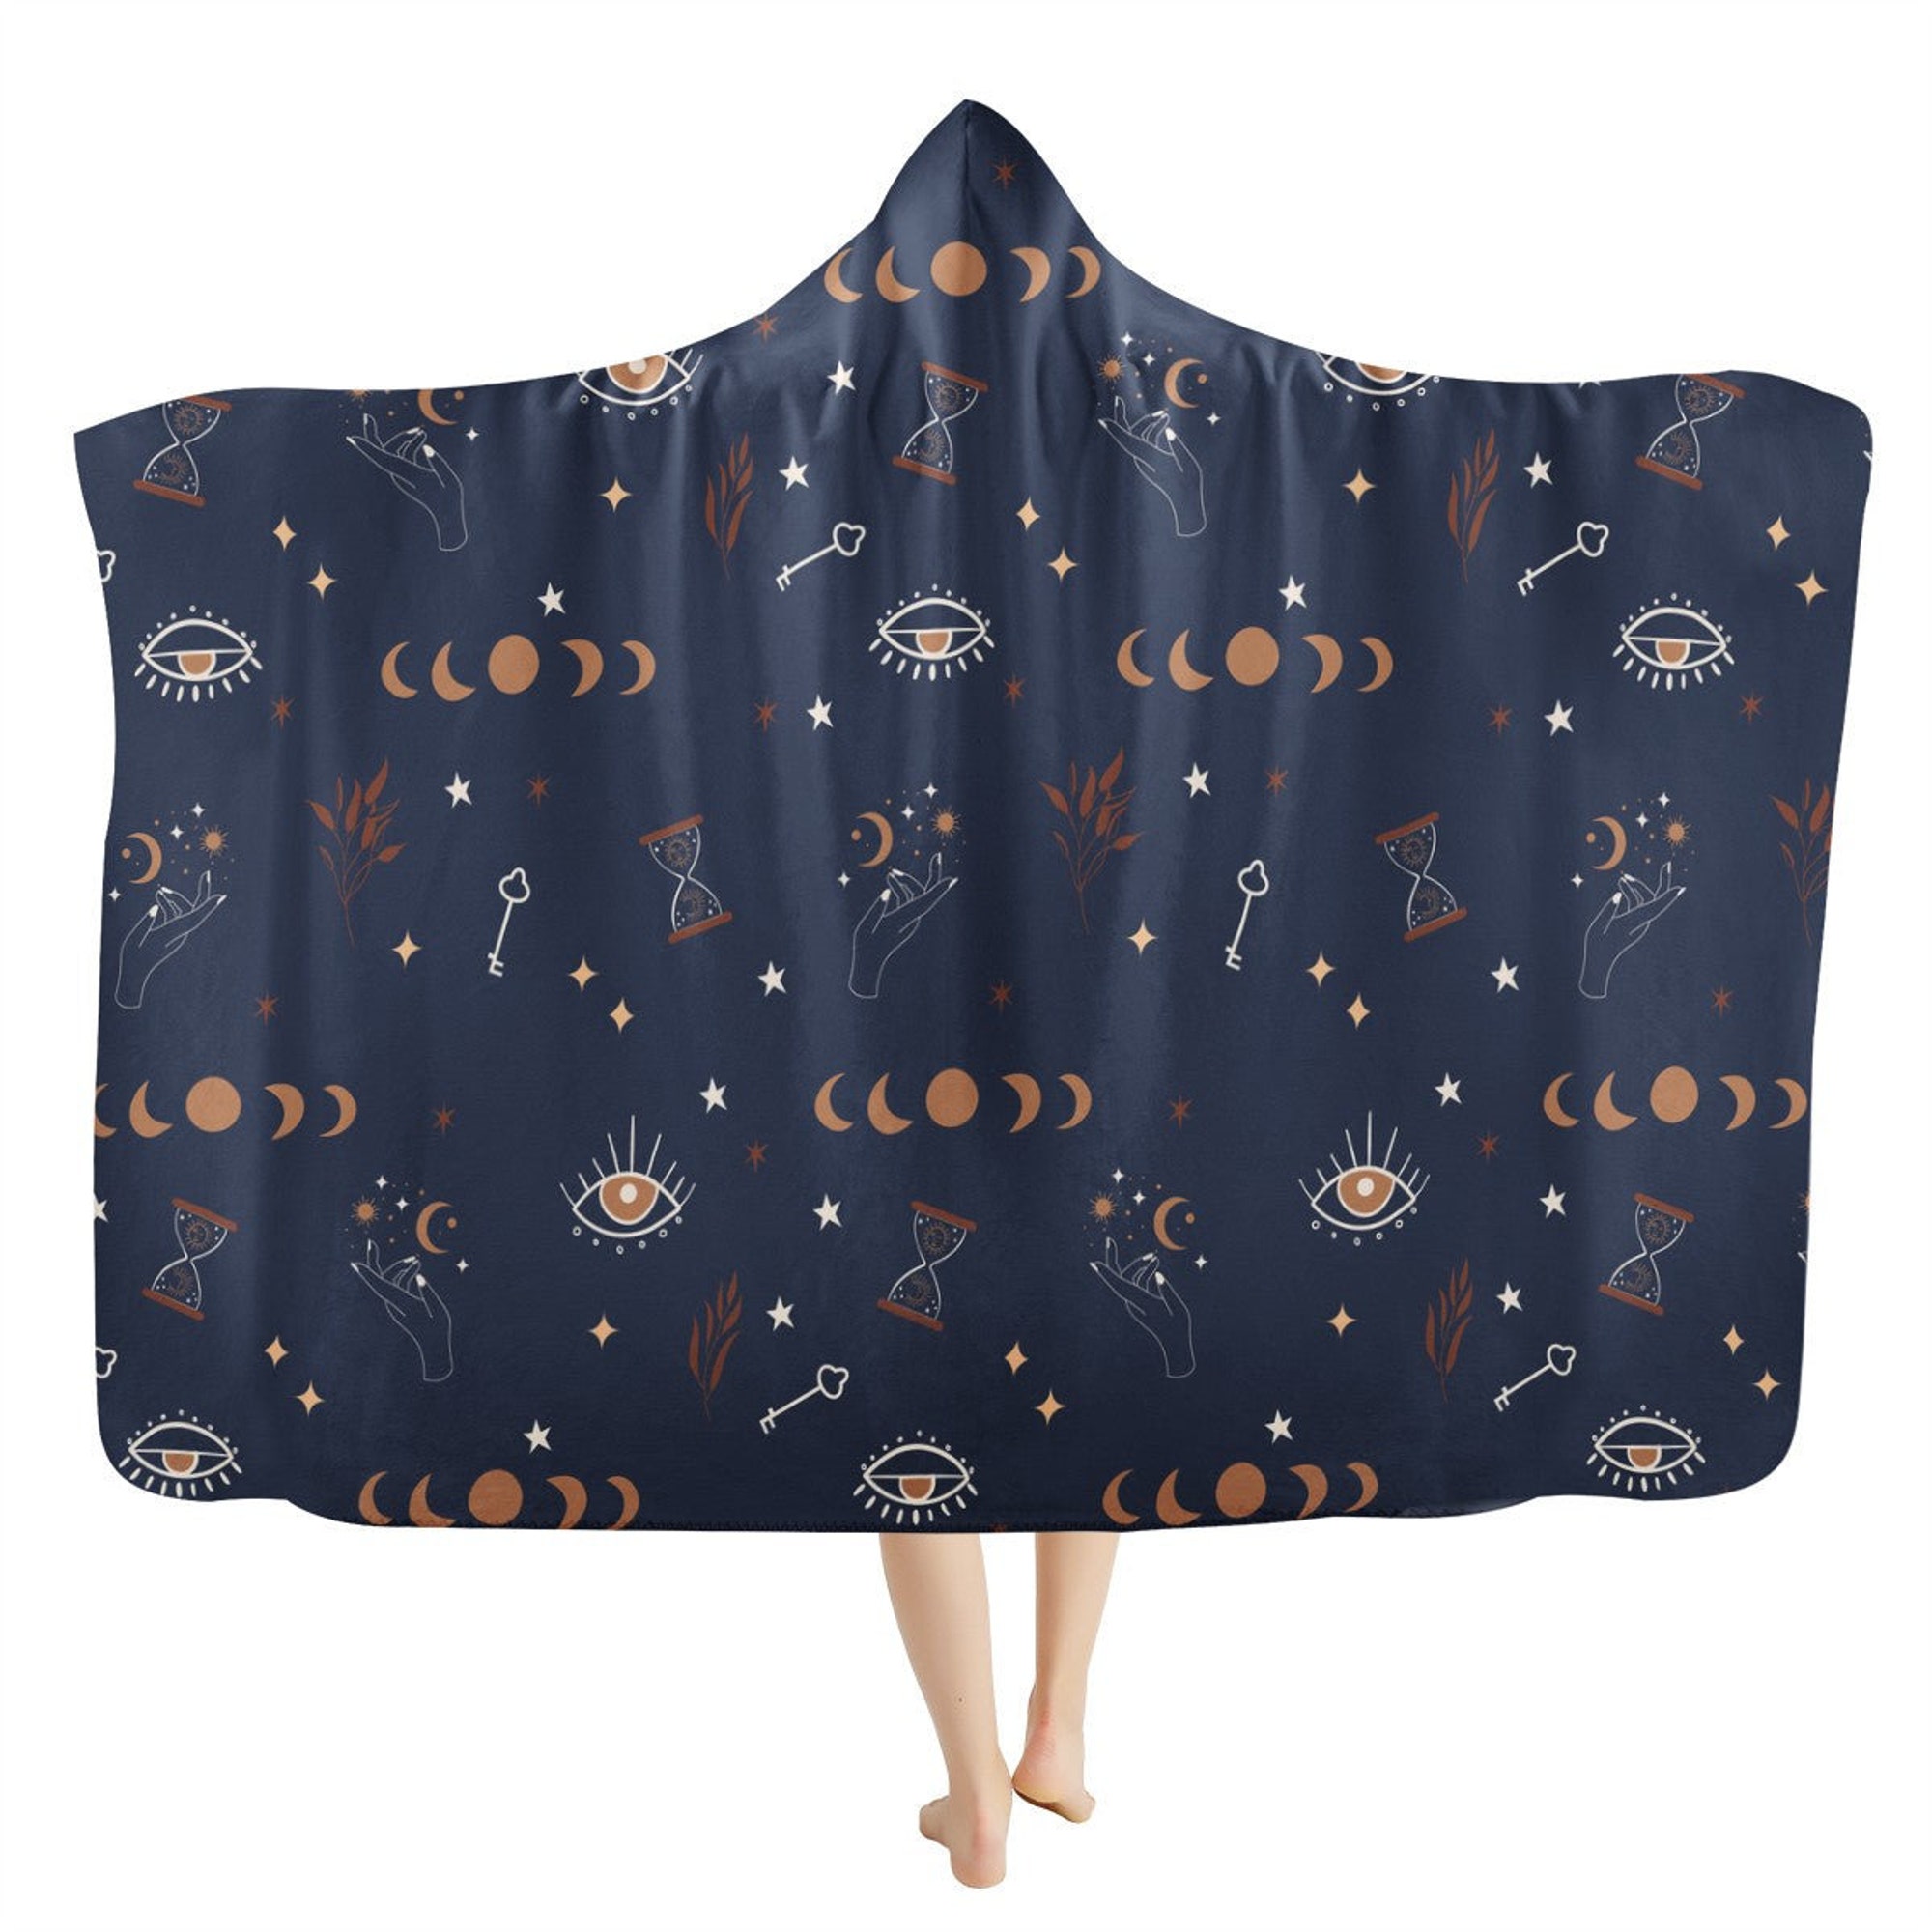 Discover Esoteric Moon Phases Alchemy Stars Hooded Blanket - Crescent Moon, Artistic Trendy Chic Fashion, Tarot Blanket, Warm Wearable Hoodie